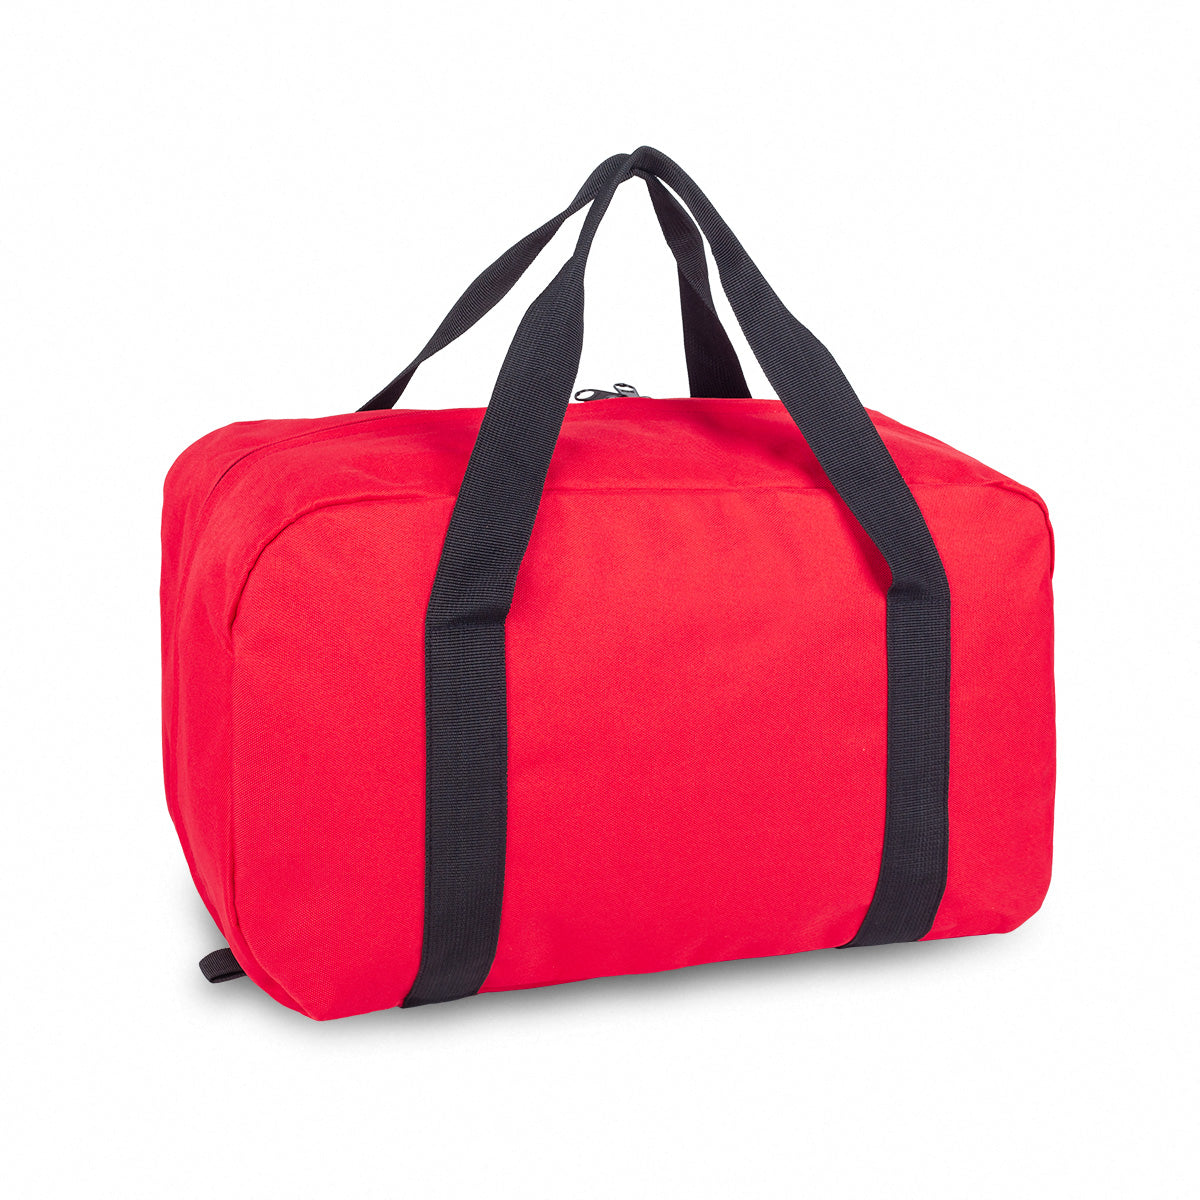 Large First Aid Kit Ability - Soft Line - Red